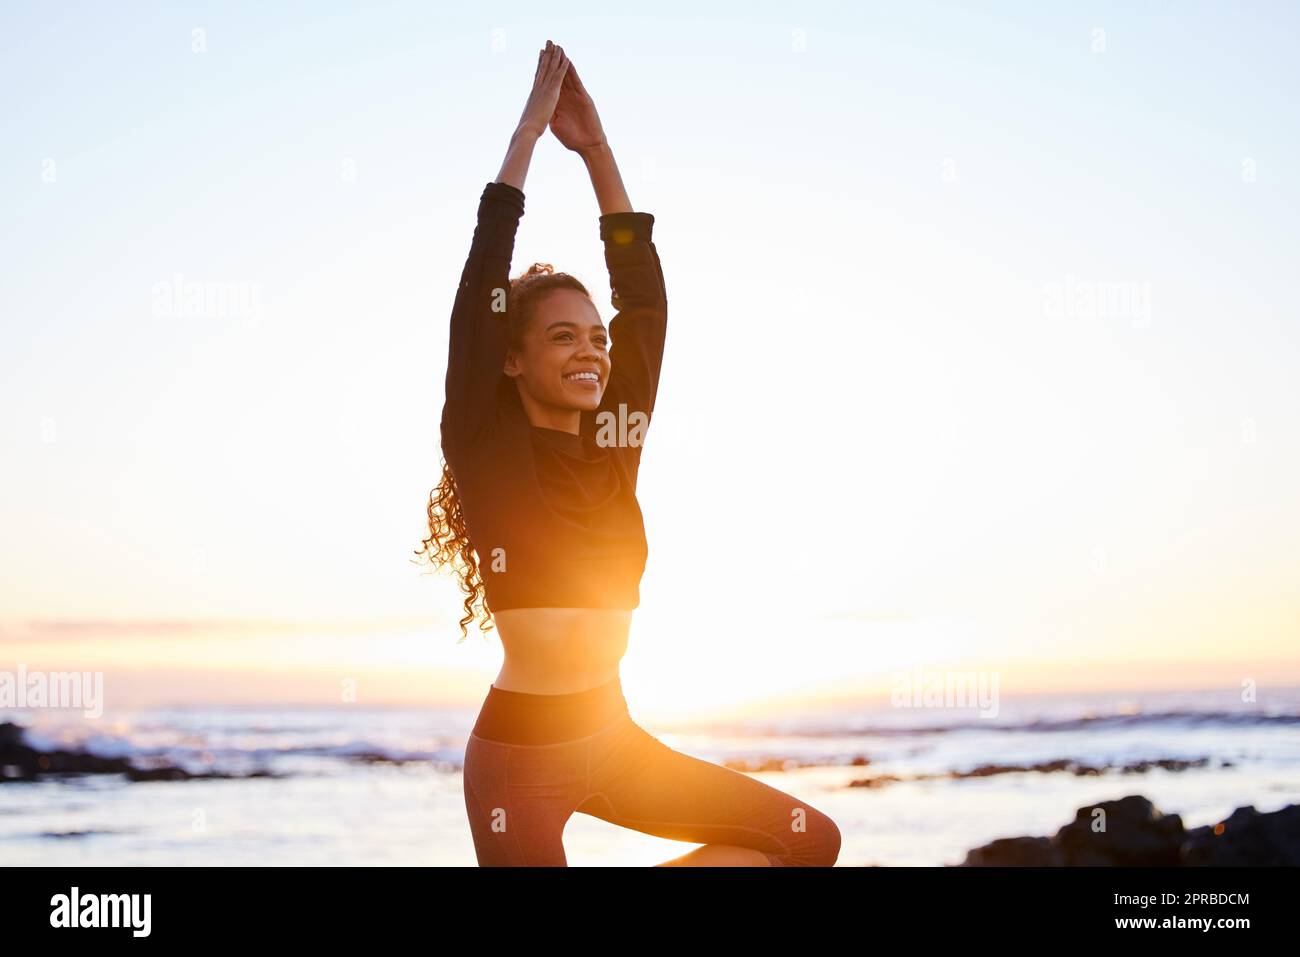 The art of yoga is balance and silence. an attractive young woman doing yoga alone on the beach at sunset. Stock Photo